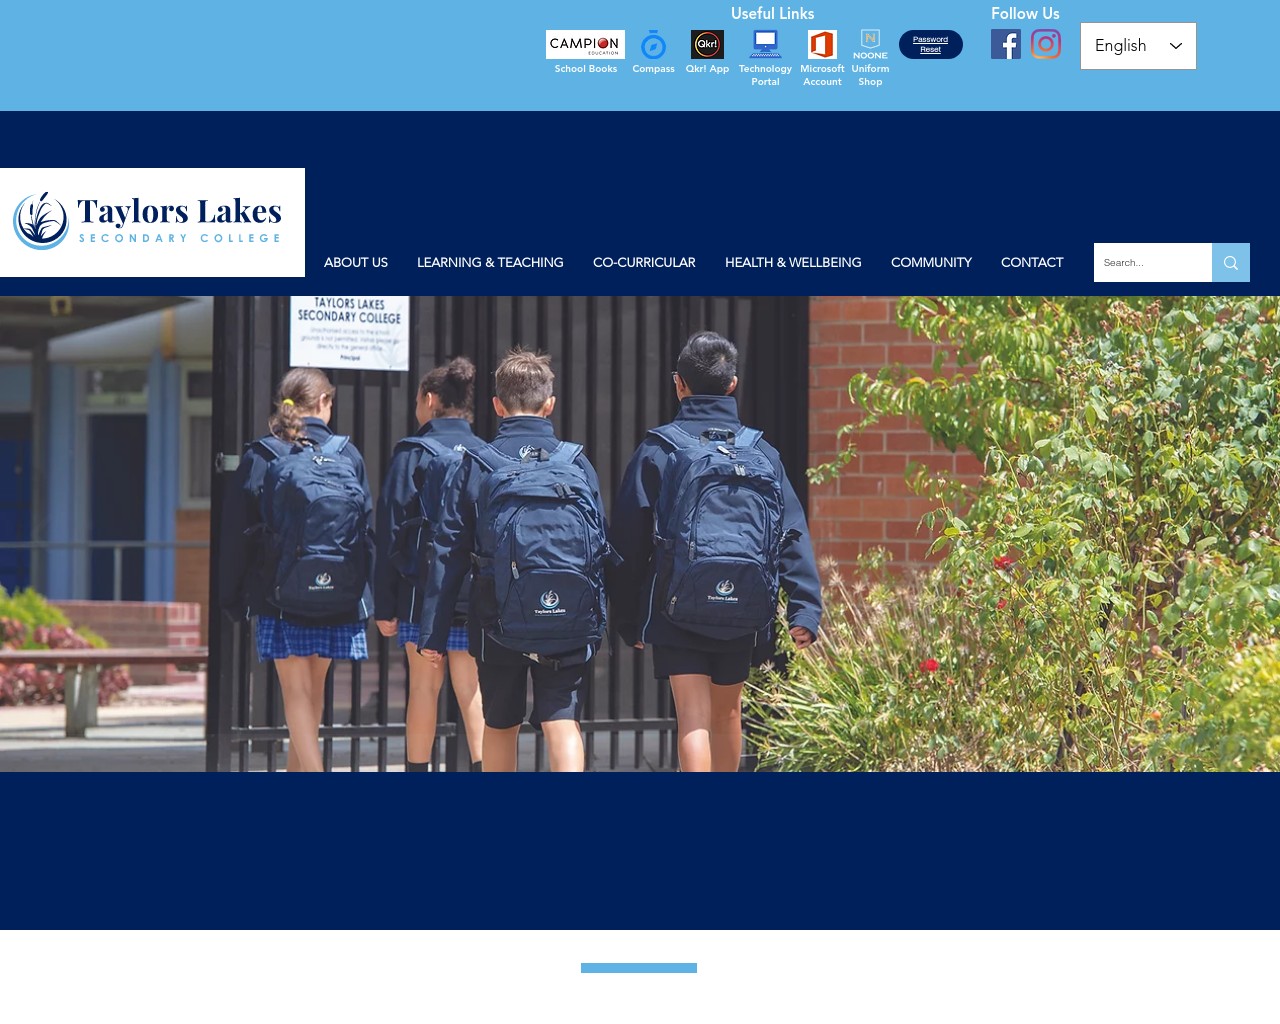 Taylors Lakes Secondary College